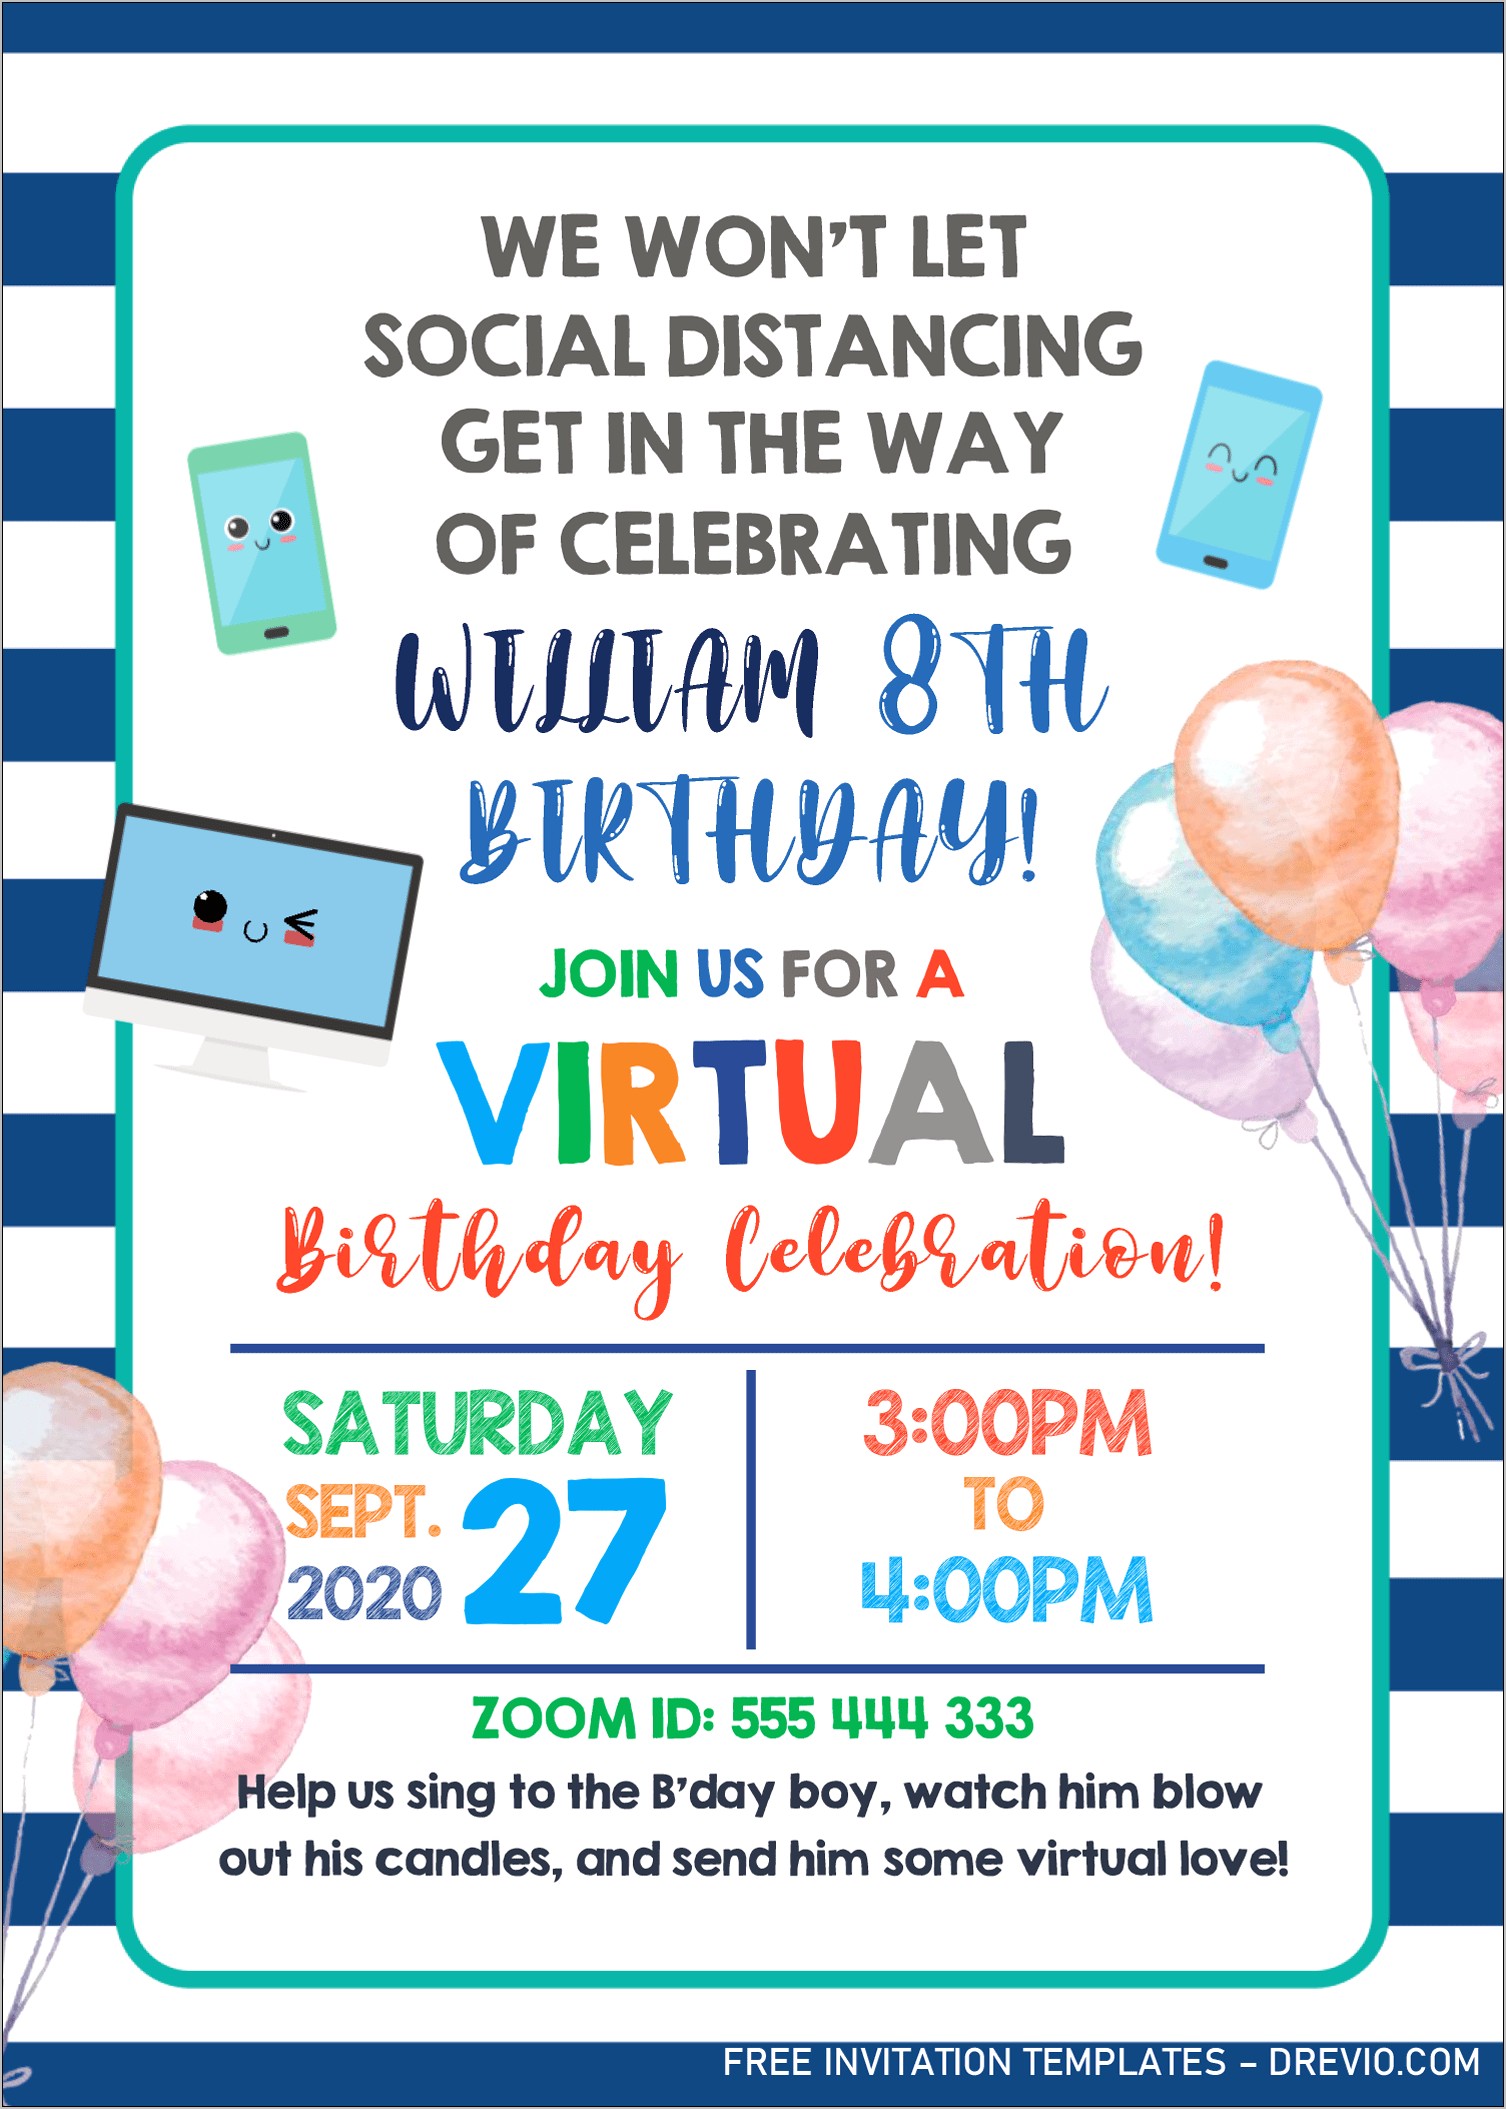 snake-birthday-party-invitations-free-templates-resume-example-gallery